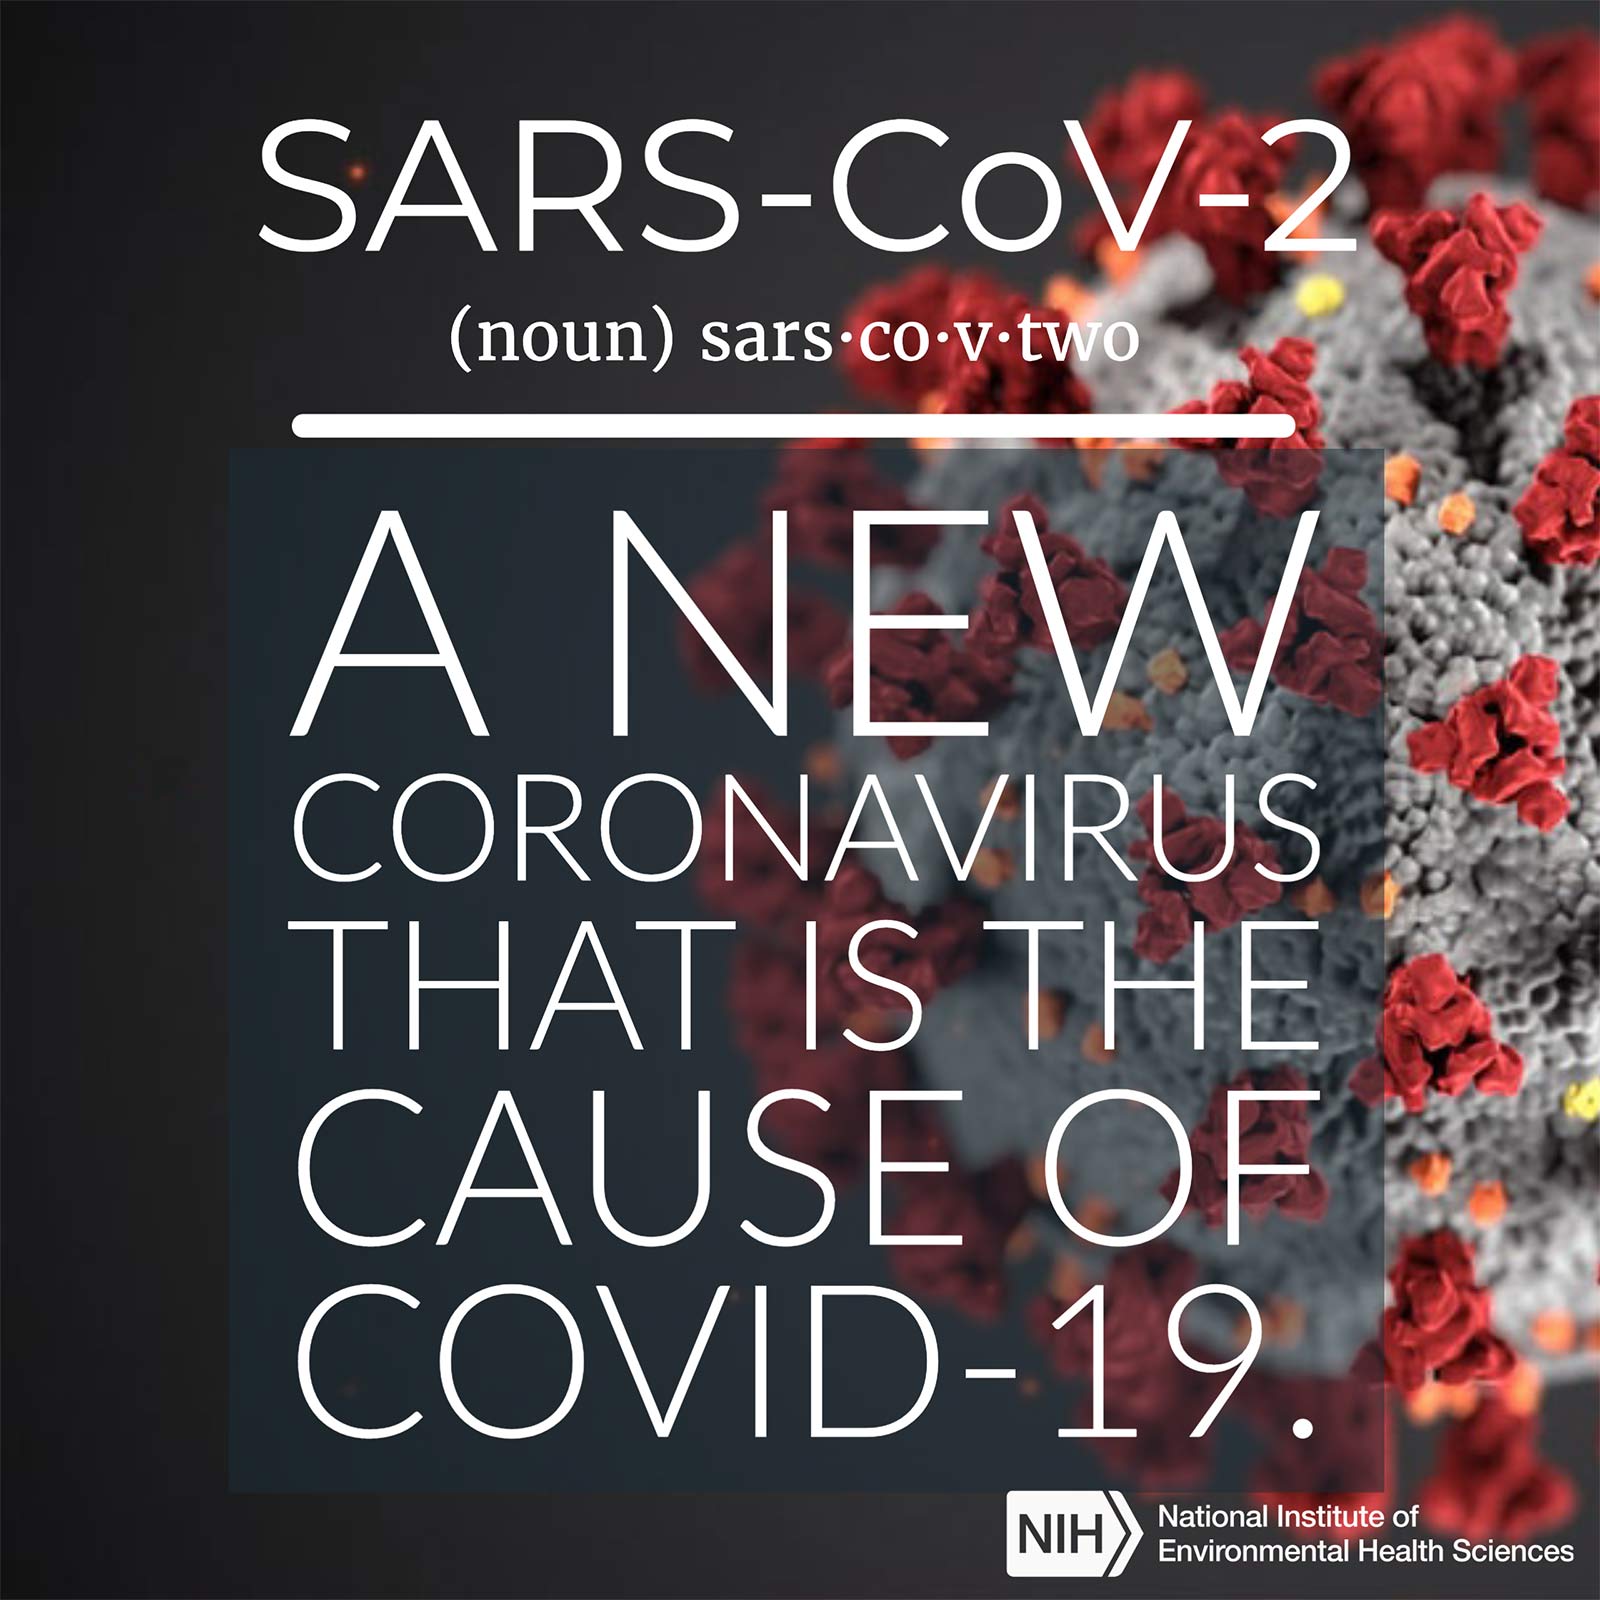 SARS-CoV-2 (noun) defined as &#39;a new coronavirus that is the cause of COVID-19.&#39;